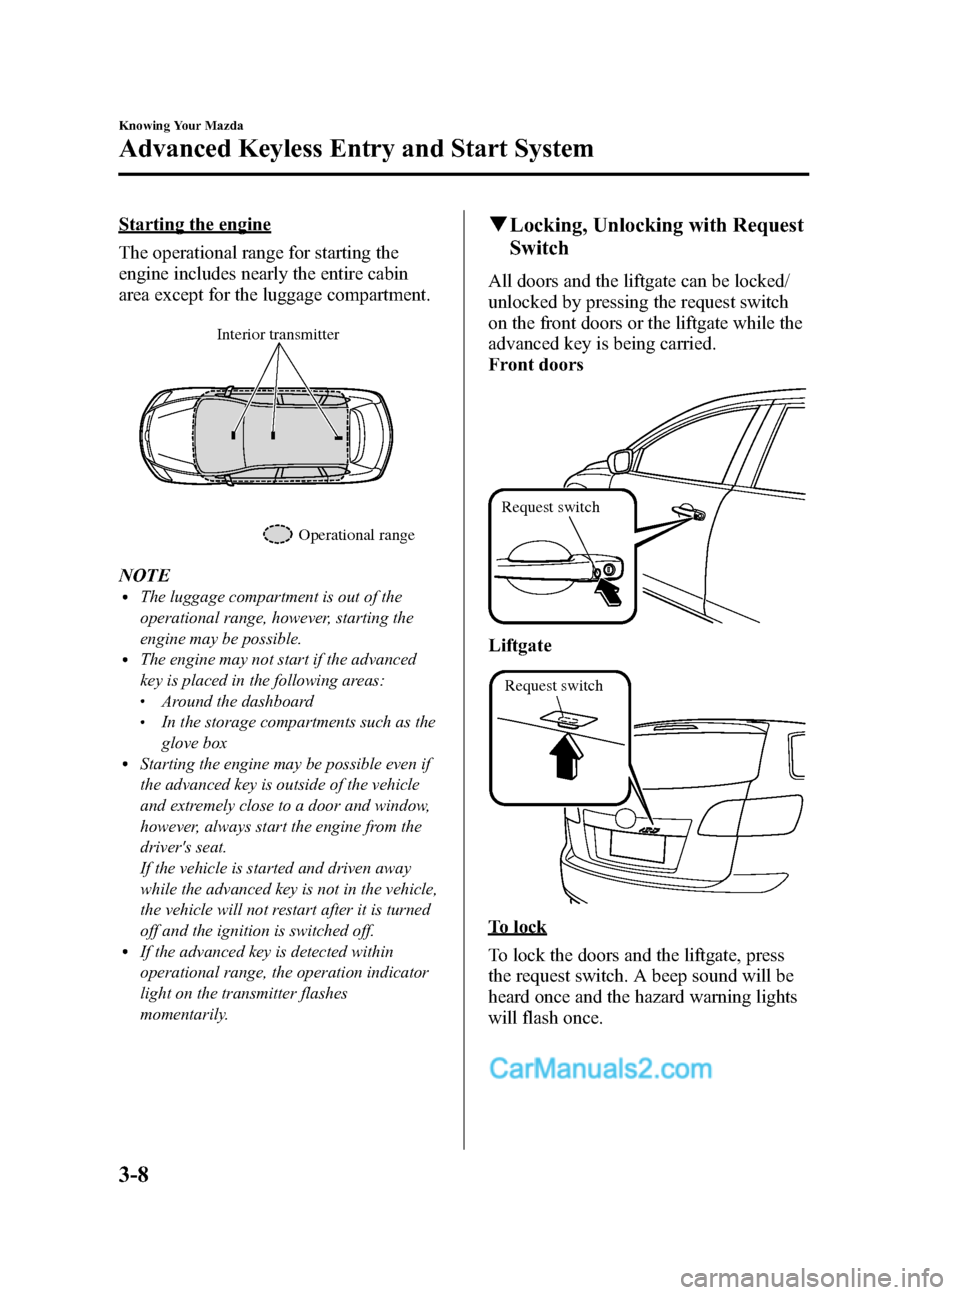 MAZDA MODEL CX-9 2015  Owners Manual (in English) Black plate (96,1)
Starting the engine
The operational range for starting the
engine includes nearly the entire cabin
area except for the luggage compartment.
Interior transmitterOperational range
NOT